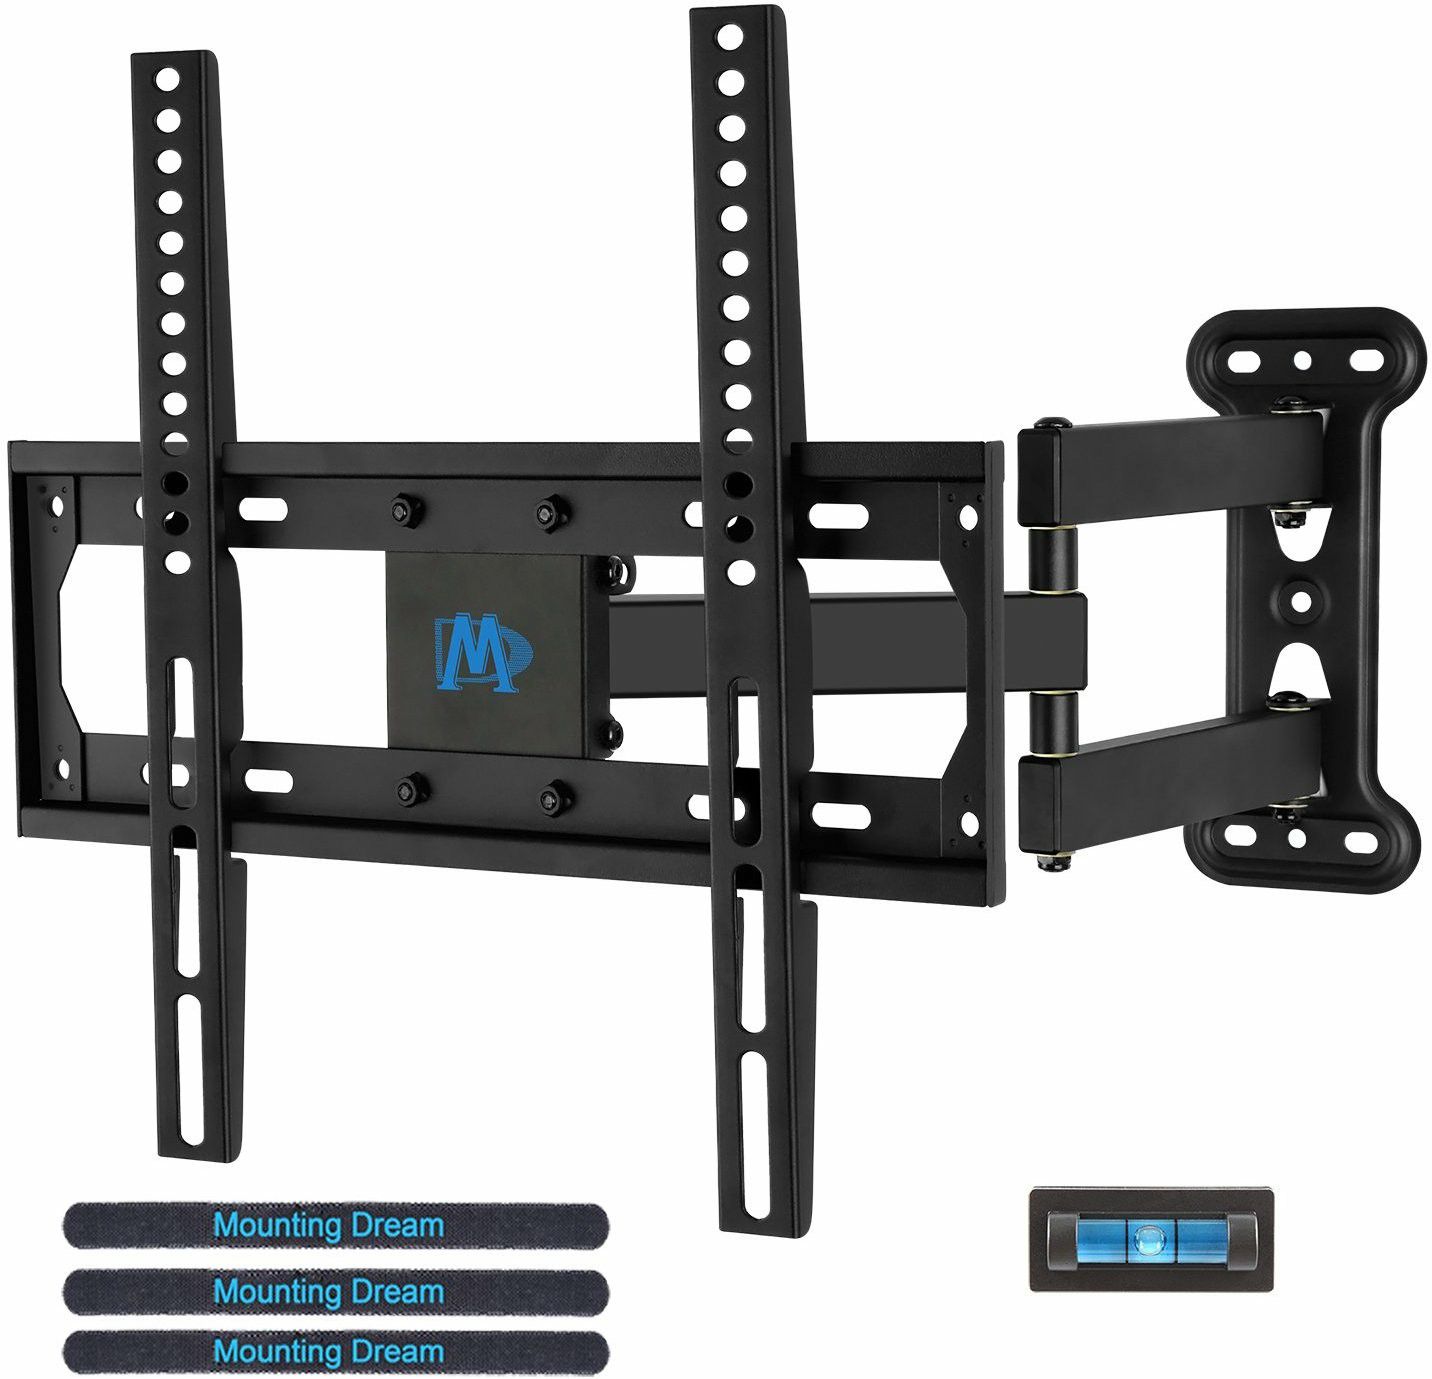 NEW!! TV Wall Mount Bracket for most of 26-55 Inch (until 60lbs)... $40